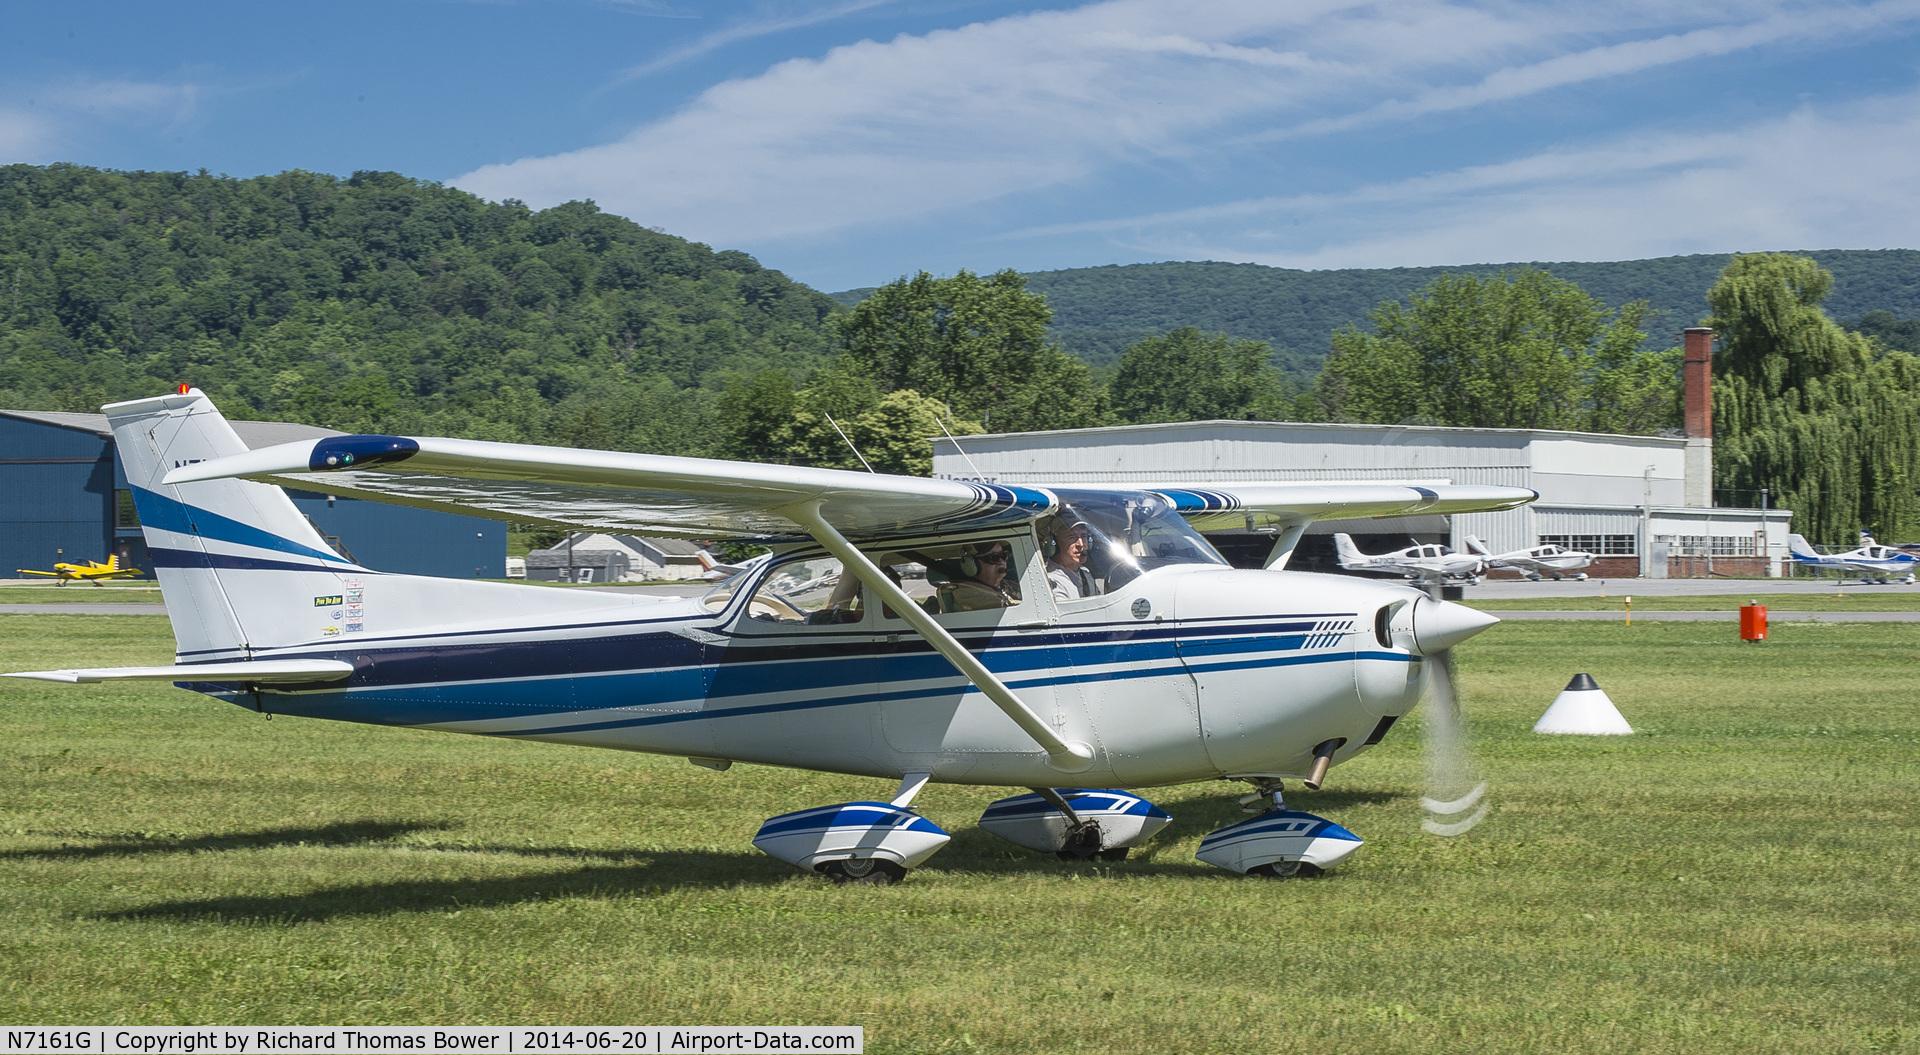 N7161G, 1969 Cessna 172K Skyhawk C/N 17258861, N7161G as seen at the 2014 Sentimental Journey Fly-In at Lock Haven, PA.